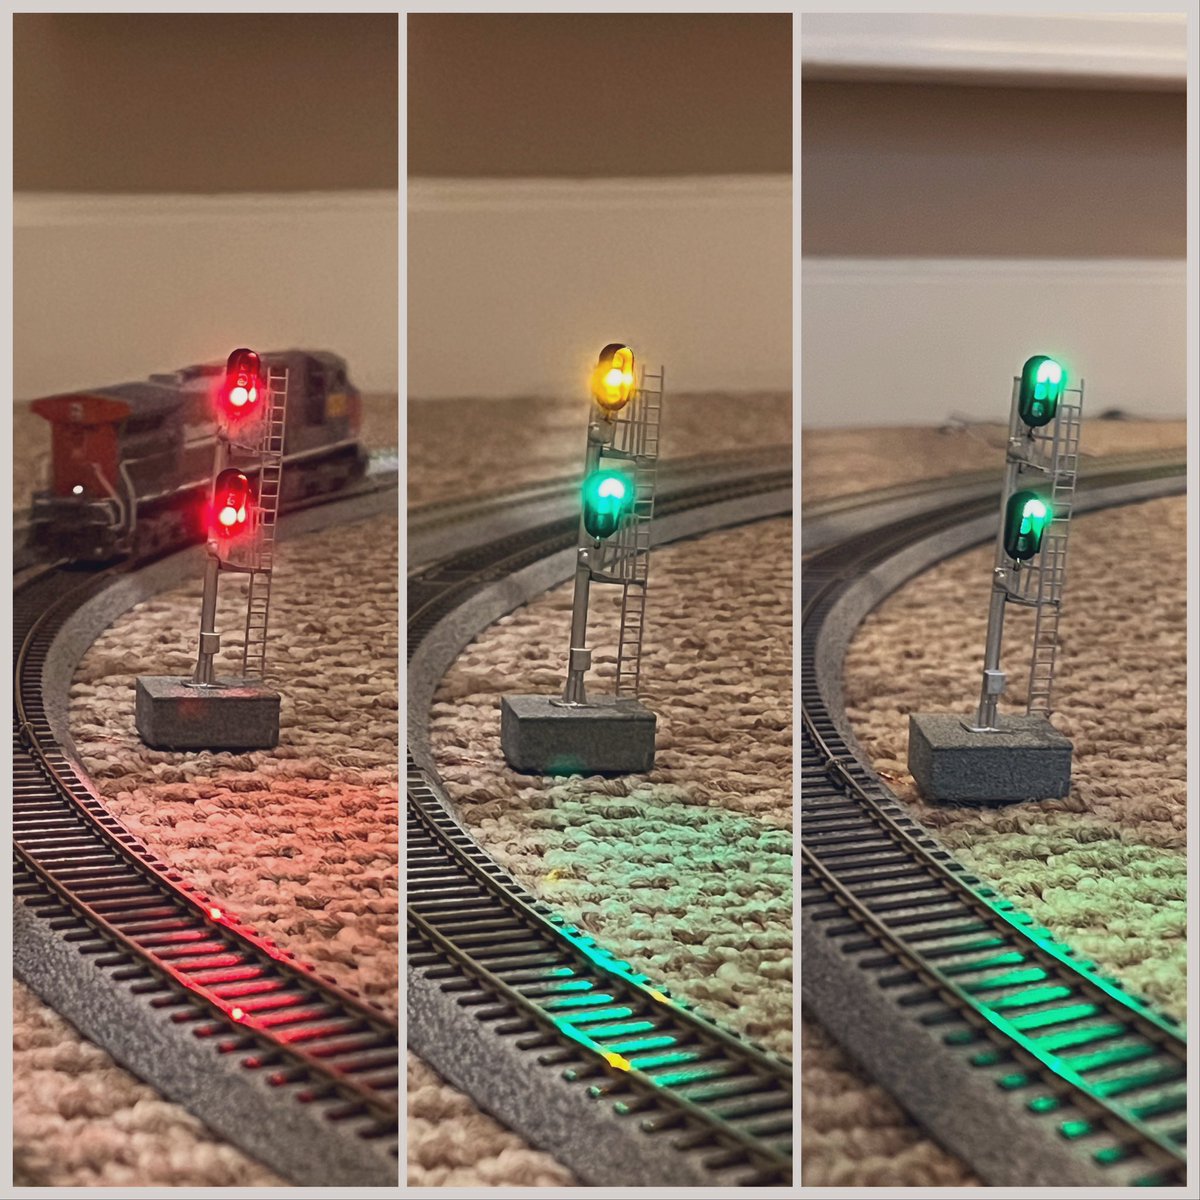 finally have a loop fully covered in occupancy detectors/broken out into blocks so signaling is based on occupancy and speed - top signal denotes higher speed (>40MPH) whilst lower is medium (25MPH) higher speed holds yellow until 2 blocks of spacing - more speed, more buffer!